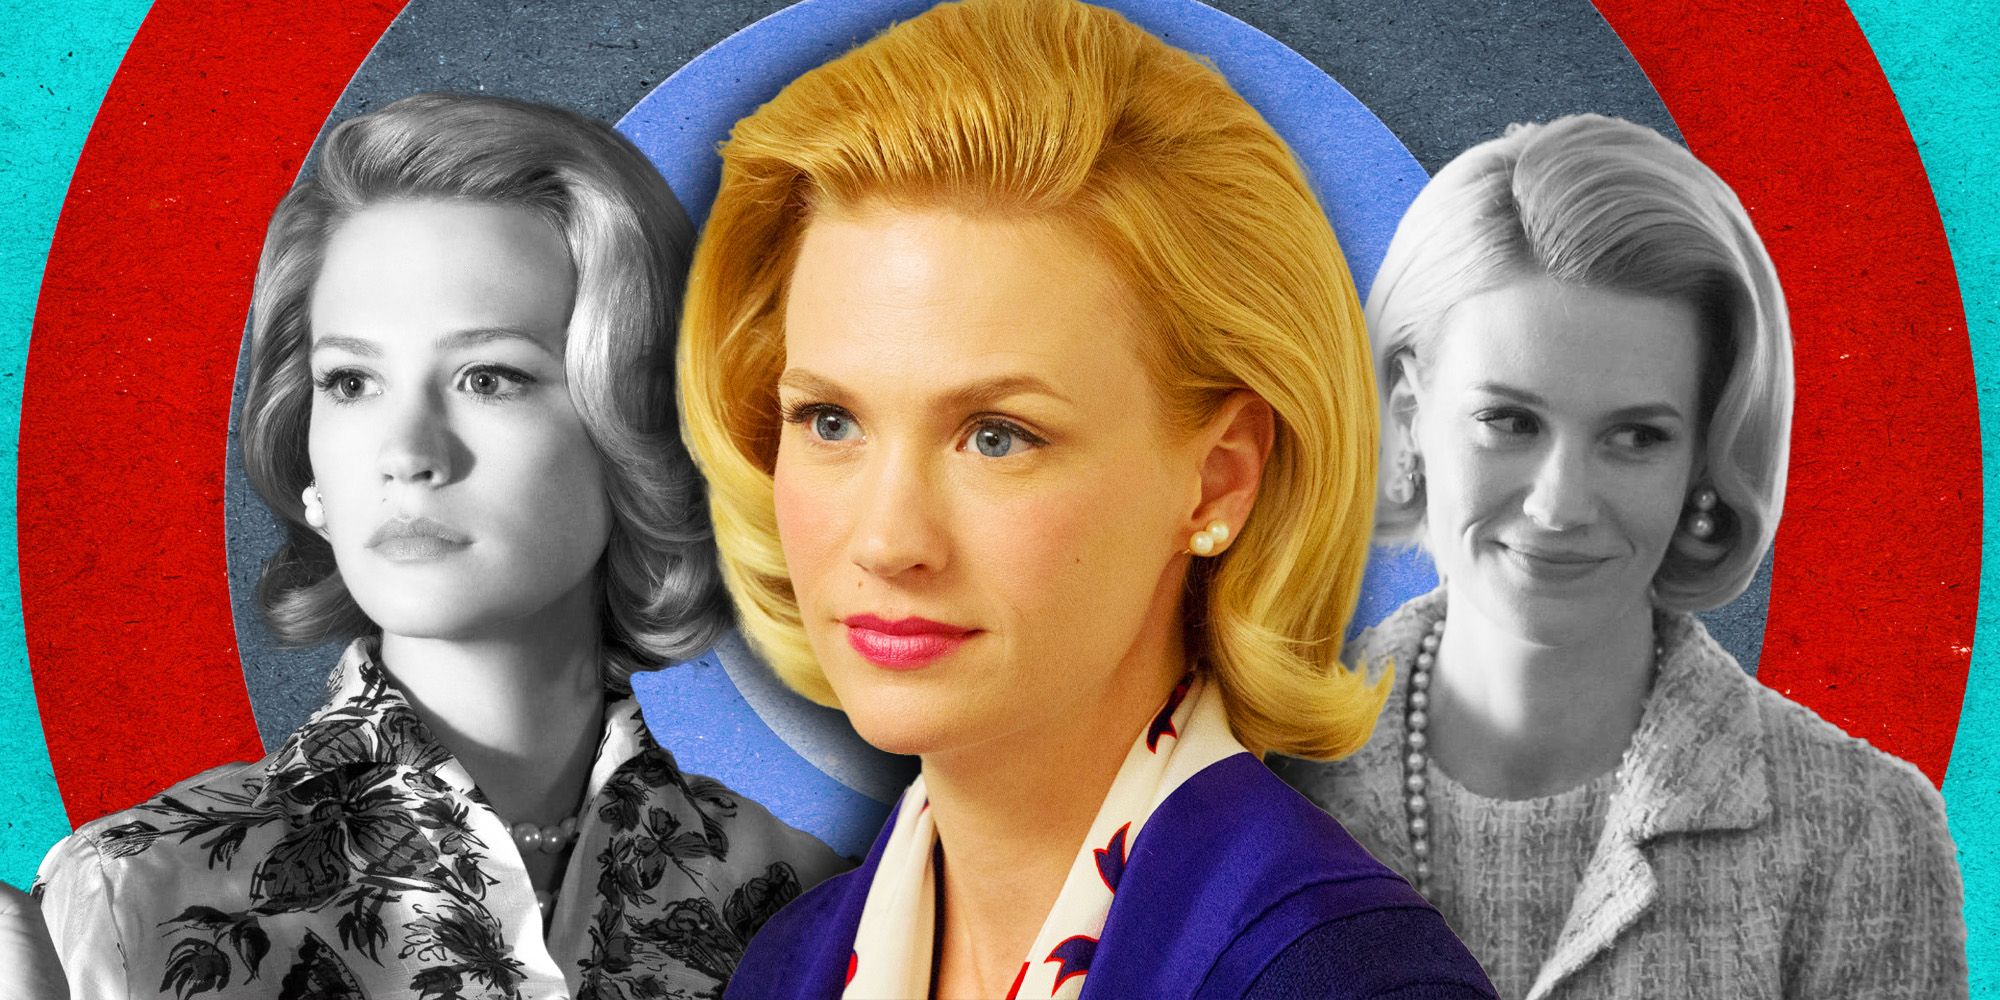 A custom image featuring January Jones as Betty in Mad Men